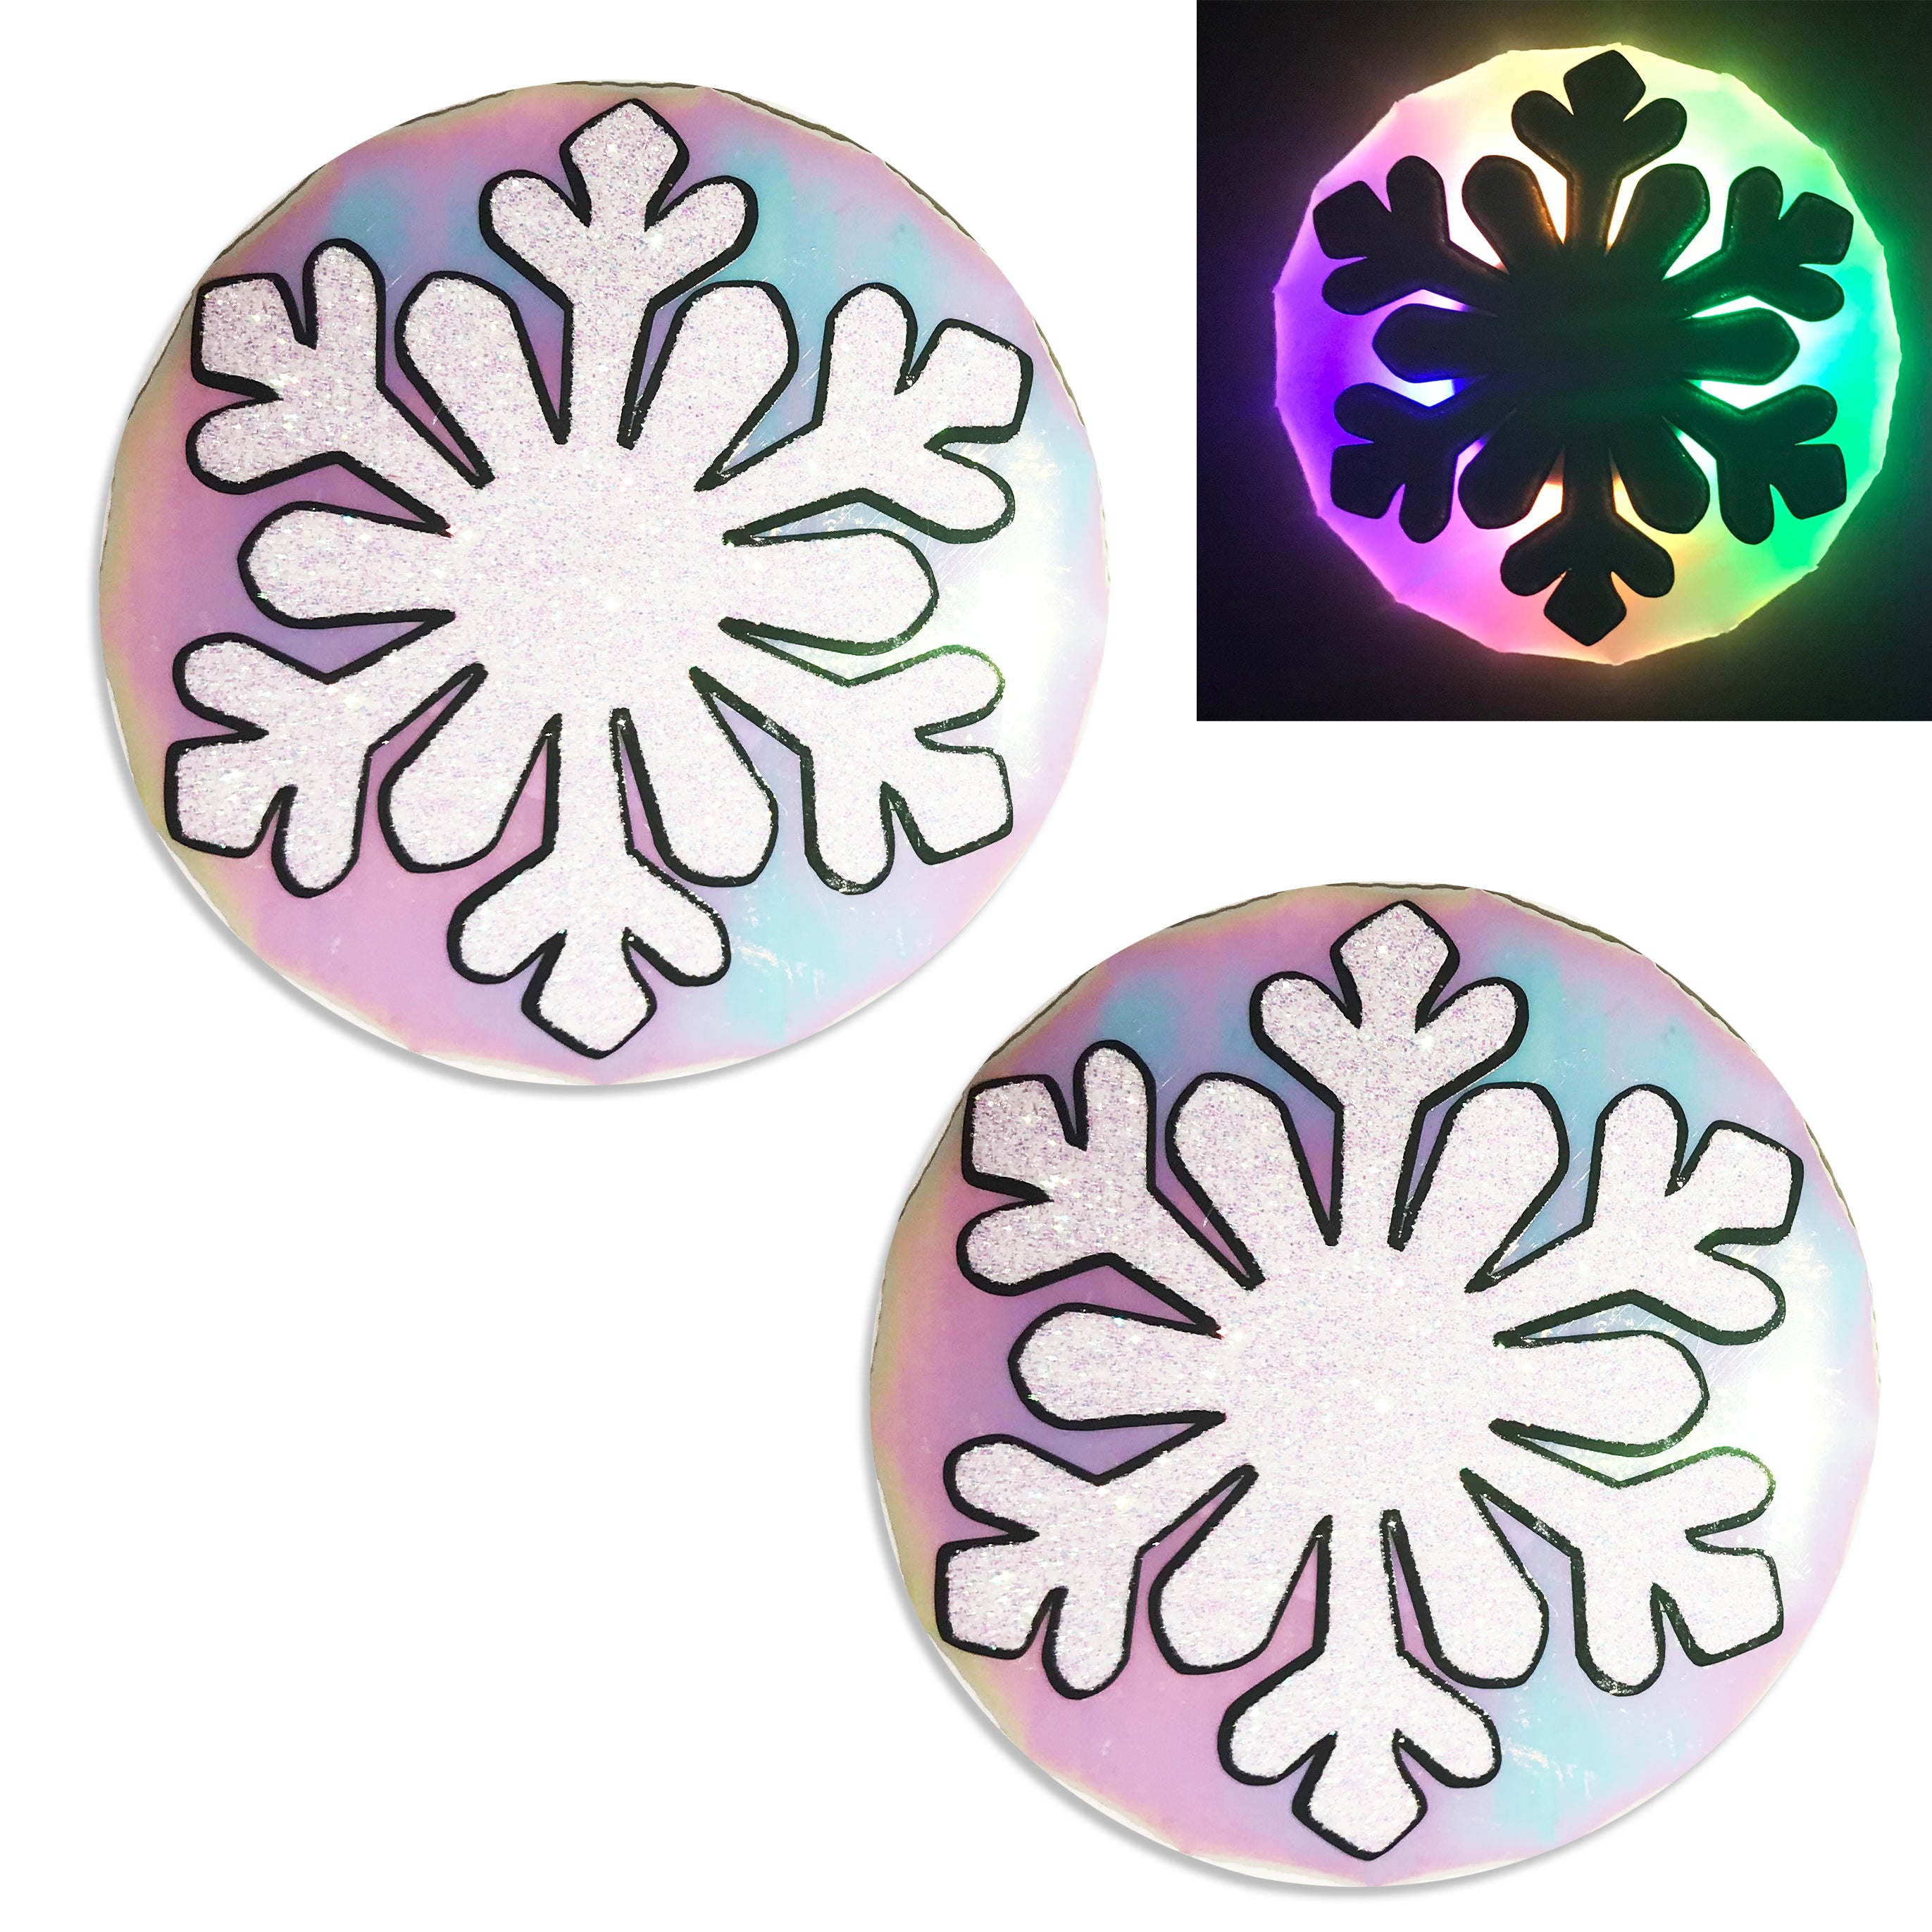 LED Nipple Pasties-Snowflake Clickers by Sasswear